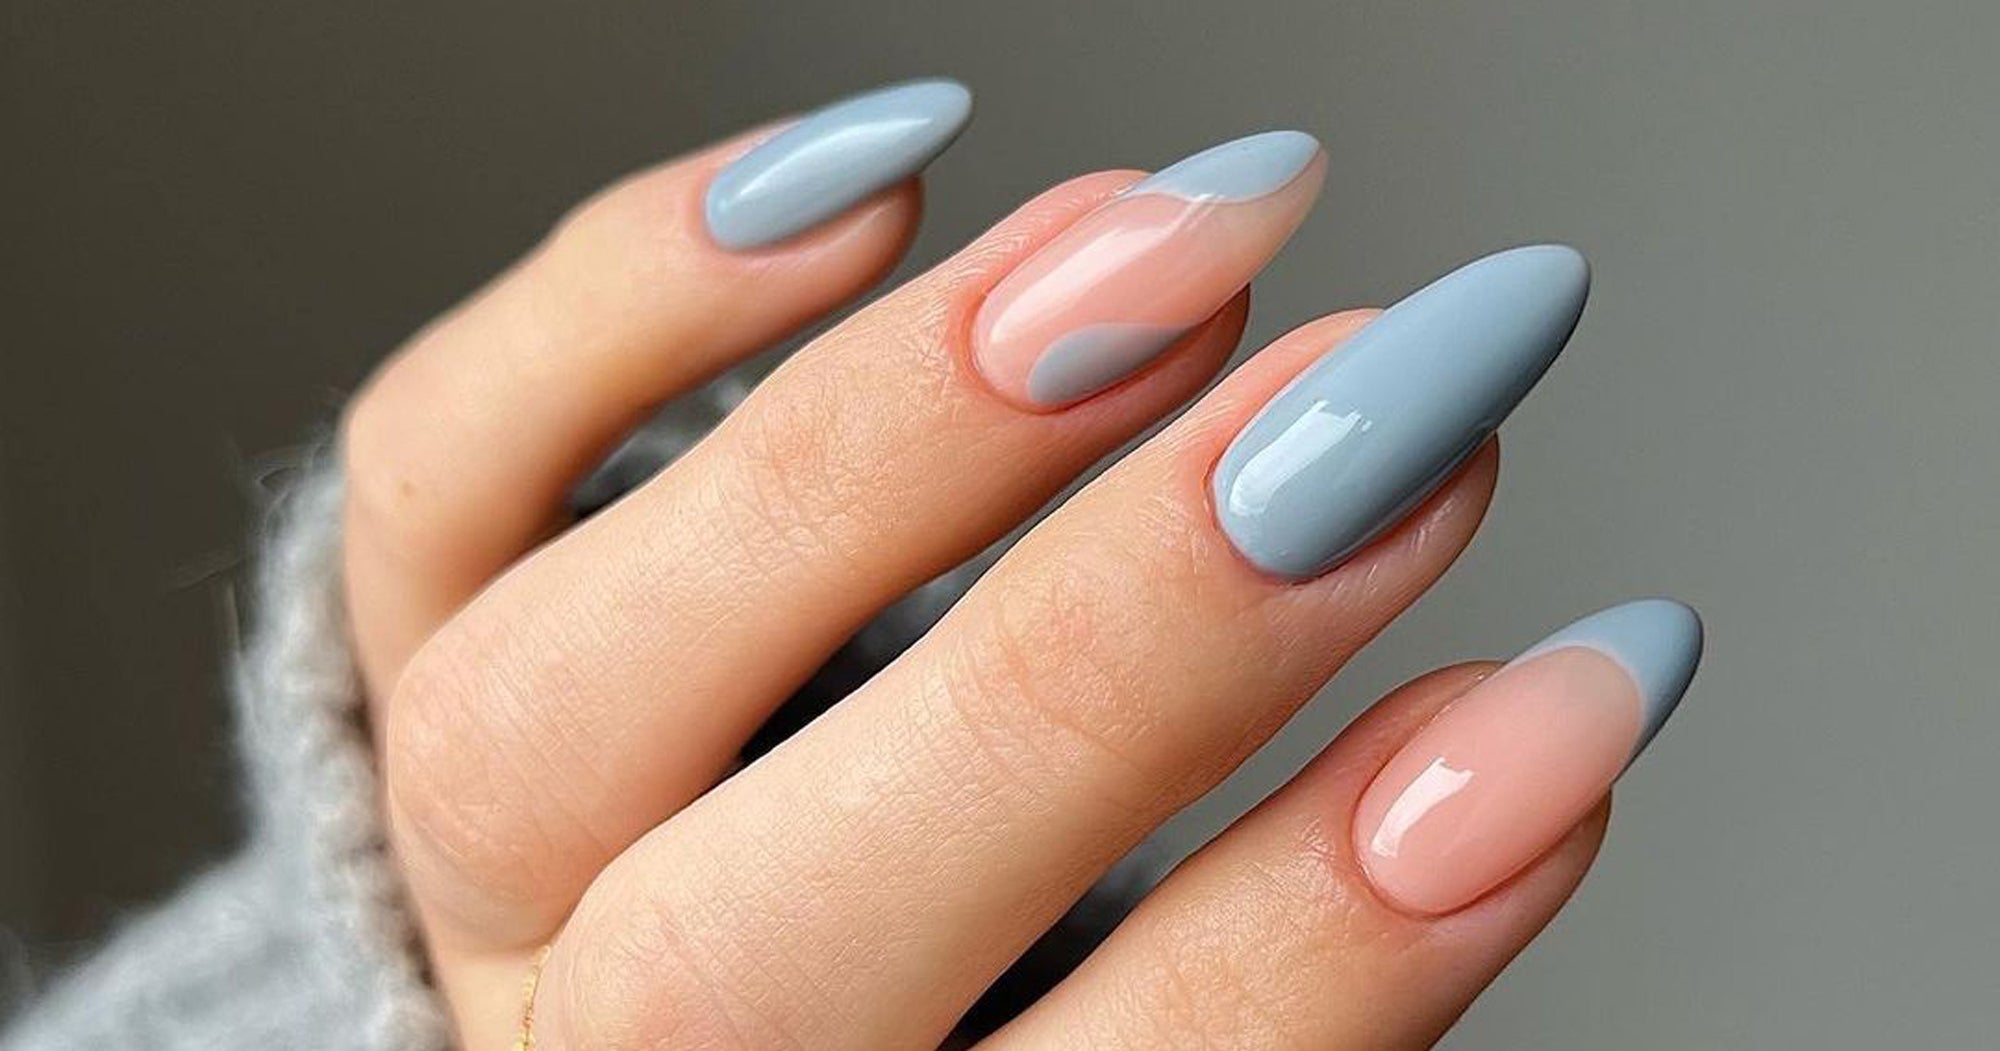 Millennial Pink: Top 5 Nail Polishes To Rock The Trend